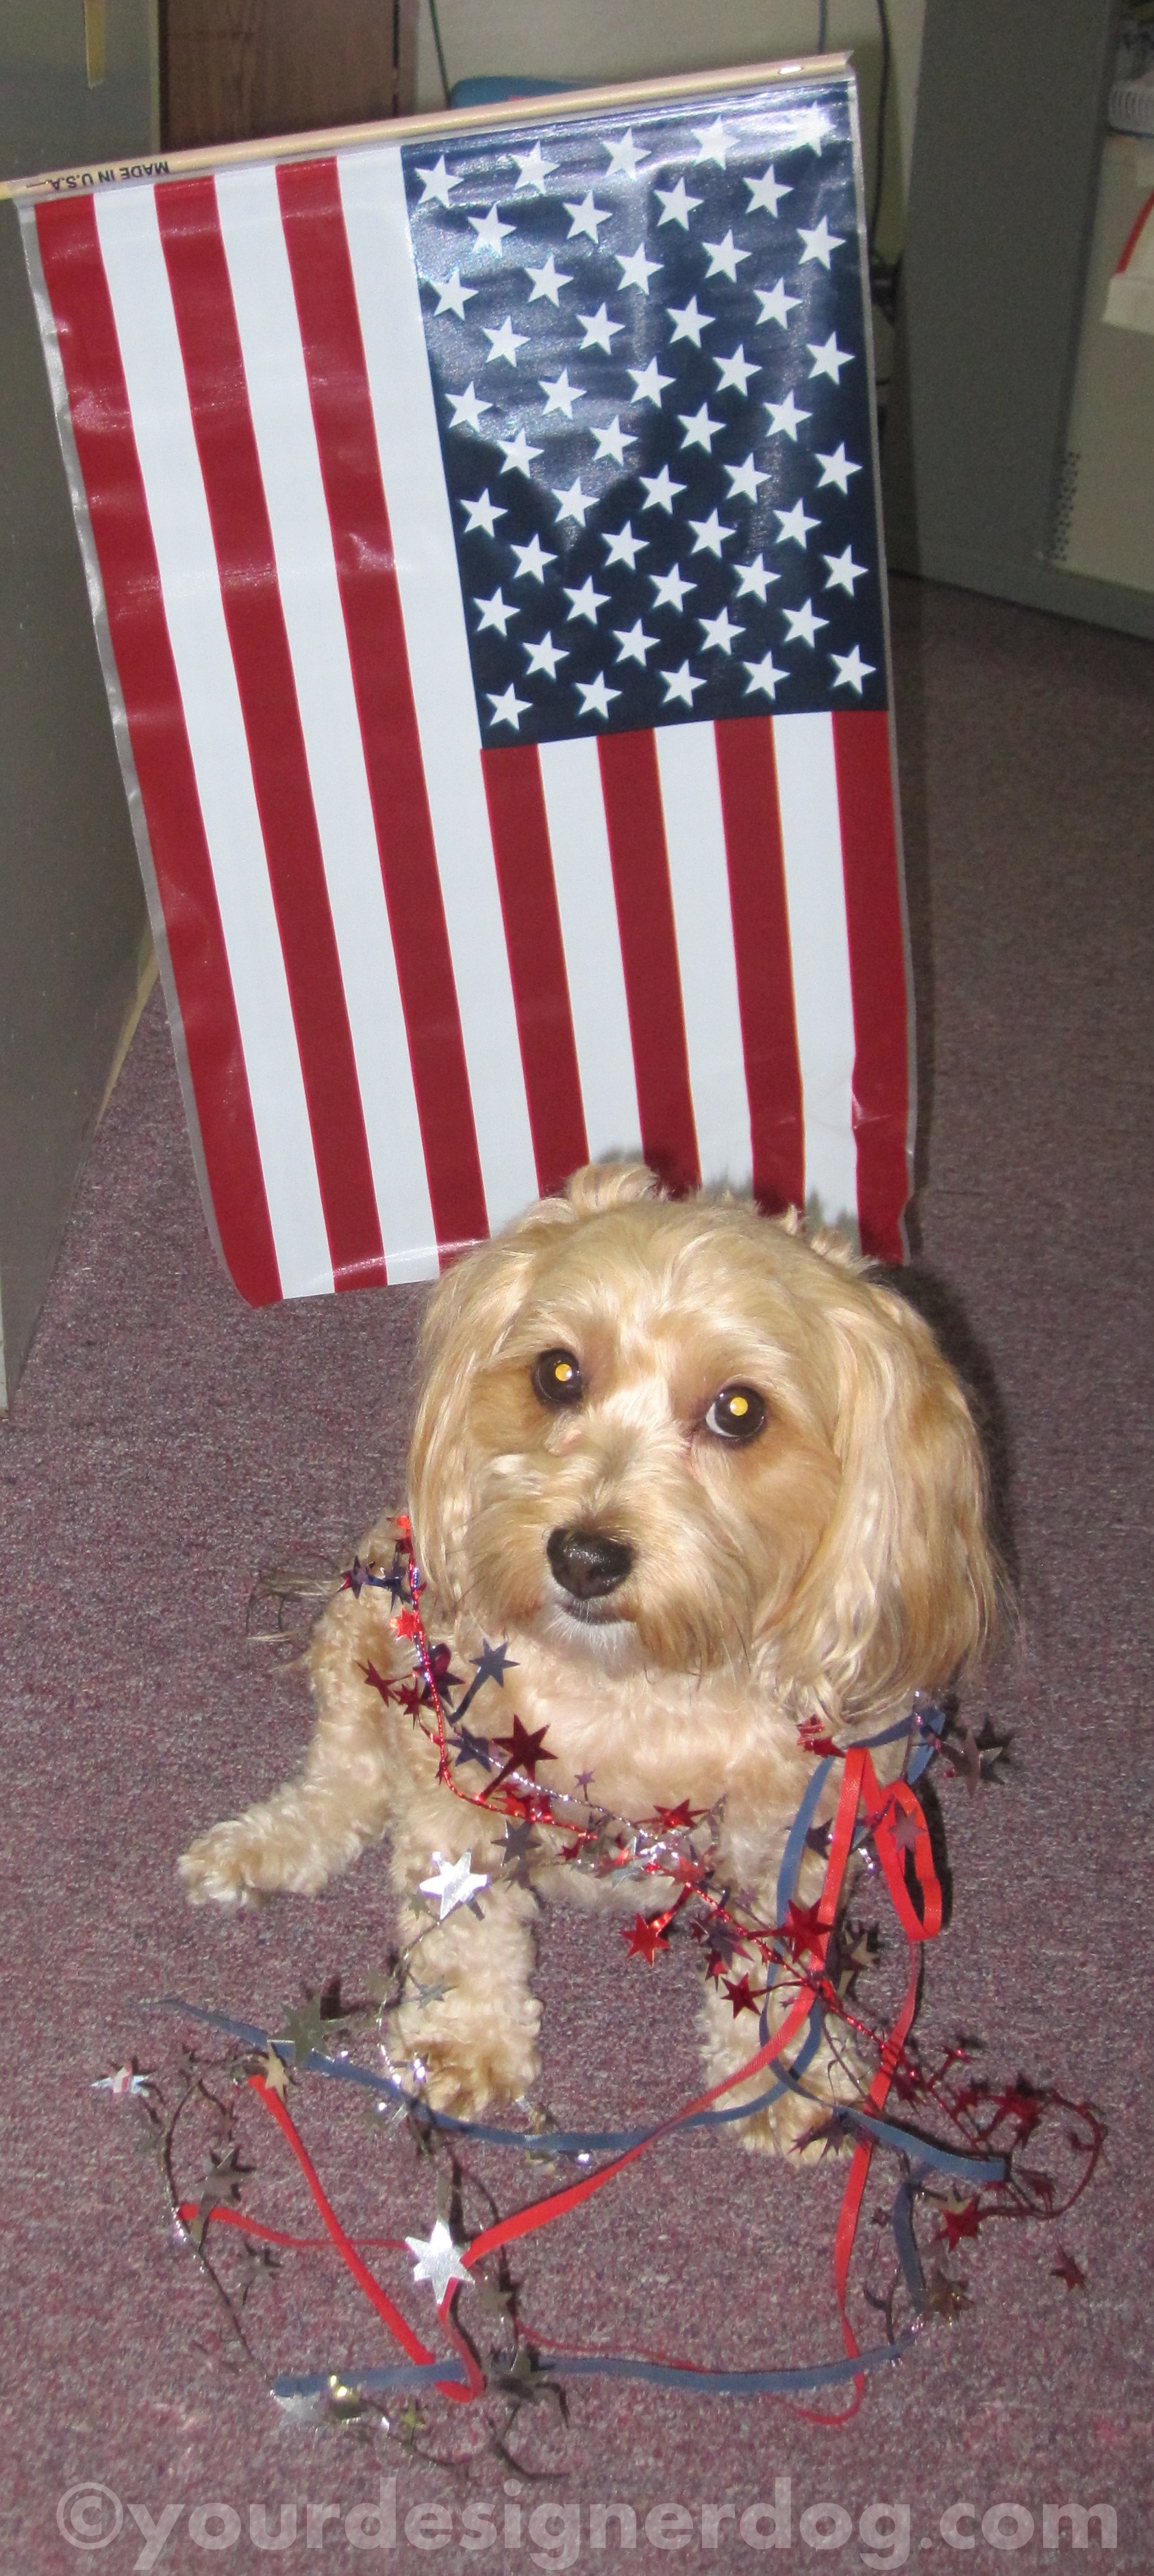 dogs, designer dogs, yorkipoo, yorkie poo, flag, patriotic, 4th of july